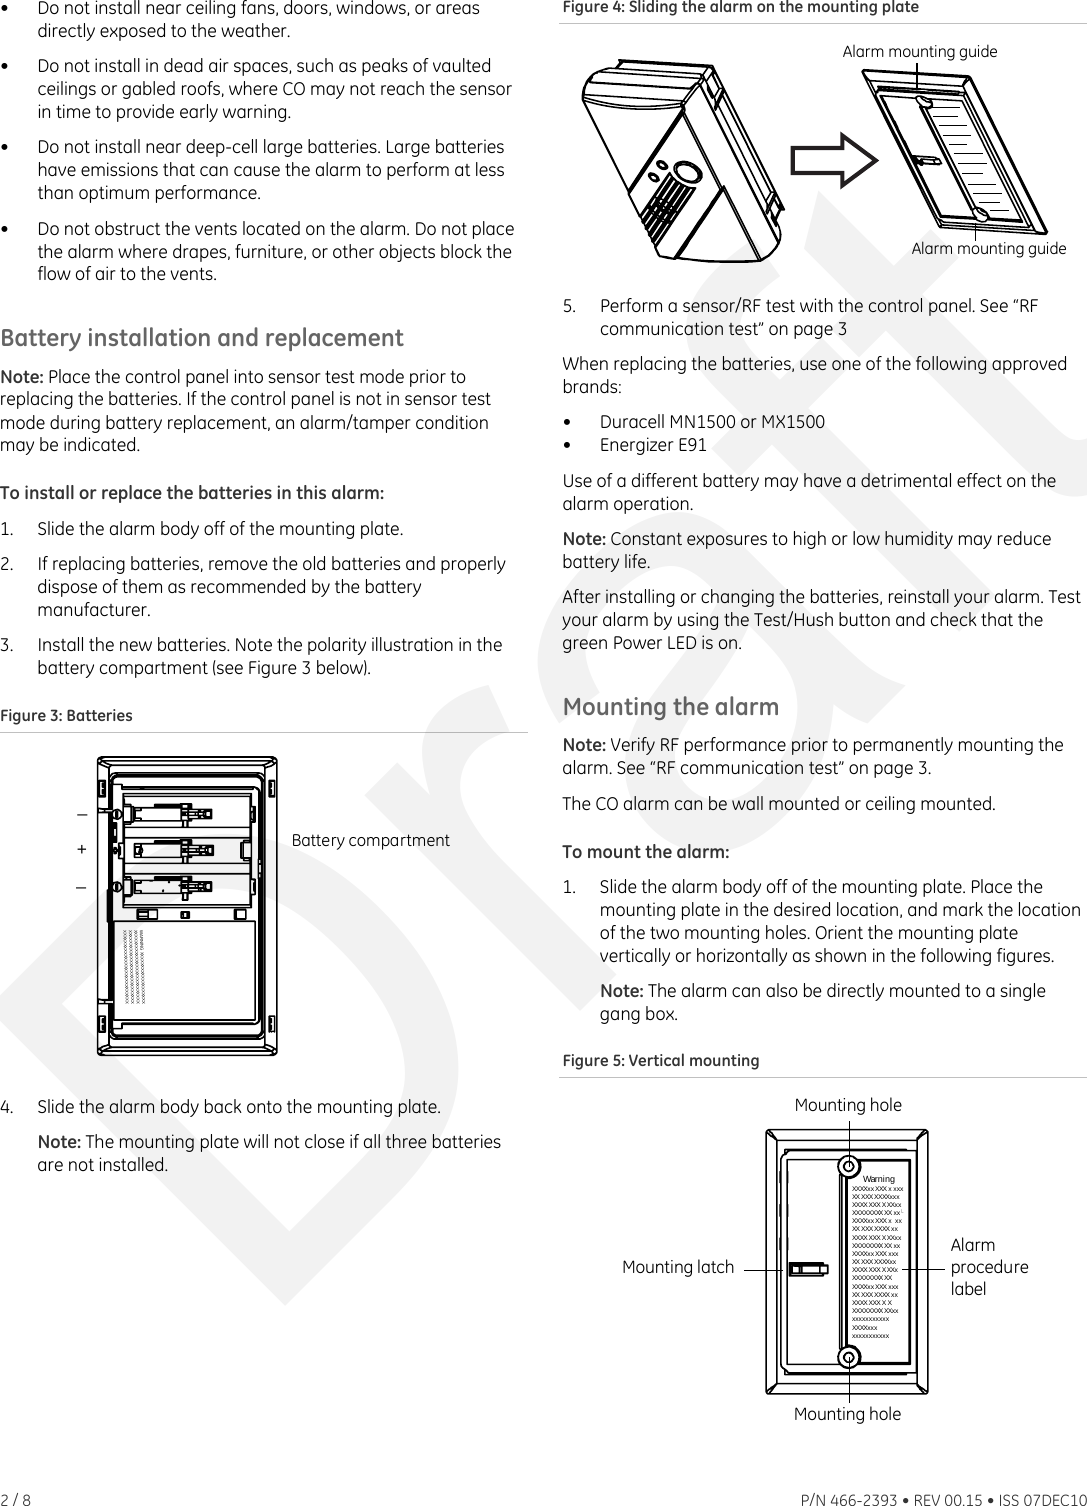 •  Do not install near ceiling fans, doors, windows, or areas directly exposed to the weather. •  Do not install in dead air spaces, such as peaks of vaulted ceilings or gabled roofs, where CO may not reach the sensor in time to provide early warning. •  Do not install near deep-cell large batteries. Large batteries have emissions that can cause the alarm to perform at less than optimum performance. •  Do not obstruct the vents located on the alarm. Do not place the alarm where drapes, furniture, or other objects block the flow of air to the vents. Battery installation and replacement Note: Place the control panel into sensor test mode prior to replacing the batteries. If the control panel is not in sensor test mode during battery replacement, an alarm/tamper condition may be indicated. To install or replace the batteries in this alarm: 1.  Slide the alarm body off of the mounting plate. 2.  If replacing batteries, remove the old batteries and properly dispose of them as recommended by the battery manufacturer. 3.  Install the new batteries. Note the polarity illustration in the battery compartment (see Figure 3 below). Figure 3: Batteries WARNING XXXXXXXXXXXXXXXXXXXXXXXXXXXXXXXXXXXXXXXXXXXXXXXXXXXXXXXXXXXXXXXXXXXXXXXXXXXXXXXXXXXXXXXXXXXXXXXXXXXXBattery compartment_+_ 4.  Slide the alarm body back onto the mounting plate. Note: The mounting plate will not close if all three batteries are not installed. Figure 4: Sliding the alarm on the mounting plate Alarm mounting guideAlarm mounting guide 5.  Perform a sensor/RF test with the control panel. See “RF communication test” on page 3When replacing the batteries, use one of the following approved brands: •  Duracell MN1500 or MX1500 • Energizer E91 Use of a different battery may have a detrimental effect on the alarm operation. Note: Constant exposures to high or low humidity may reduce battery life. After installing or changing the batteries, reinstall your alarm. Test your alarm by using the Test/Hush button and check that the green Power LED is on. Mounting the alarm Note: Verify RF performance prior to permanently mounting the alarm. See “RF communication test” on page 3. The CO alarm can be wall mounted or ceiling mounted. To mount the alarm: 1.  Slide the alarm body off of the mounting plate. Place the mounting plate in the desired location, and mark the location of the two mounting holes. Orient the mounting plate vertically or horizontally as shown in the following figures. Note: The alarm can also be directly mounted to a single gang box. Figure 5: Vertical mounting Mounting holeMounting latchAlarmprocedurelabelWar n i ngXXXXxx XXX x xxxXX XXX XXXXxxxXXXX XXX XXXxxXXXXXXXX XX xxXXXXxx XXX x  xxXX XXXXXXX xxXXXX XXX XXXxxXXXXXXXX XX xxXXXXxx XXX xxxXX XXX XXXXx xXXXX XXX XXXxXXXXXXXX XXXXXXxx XXX xxxXX XXXXXXX xxXXXX XXX X XXXXXXXXX XXxxxxxxxxxxxxxXXXXxx xxxxxxxxxxxxMounting hole 2 / 8    P/N 466-2393 • REV 00.15 • ISS 07DEC10 Draft